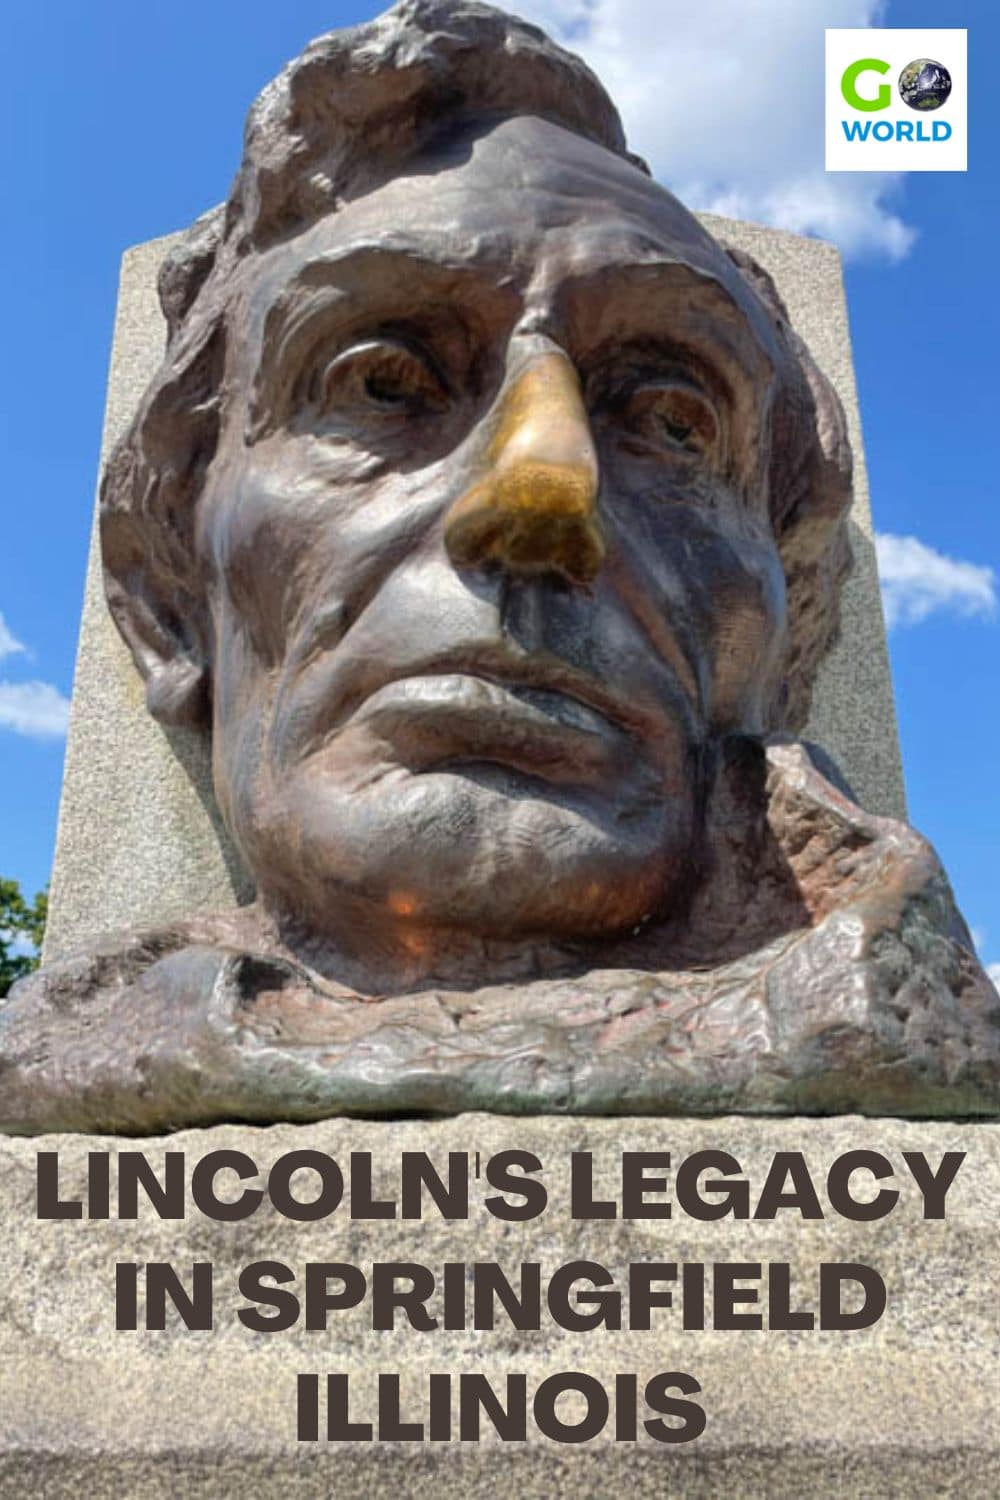 A visit to Abe Lincoln's home, museum, tomb and other attractions in Springfield Illinois is a must for American history buffs. #Illinois #abelincoln